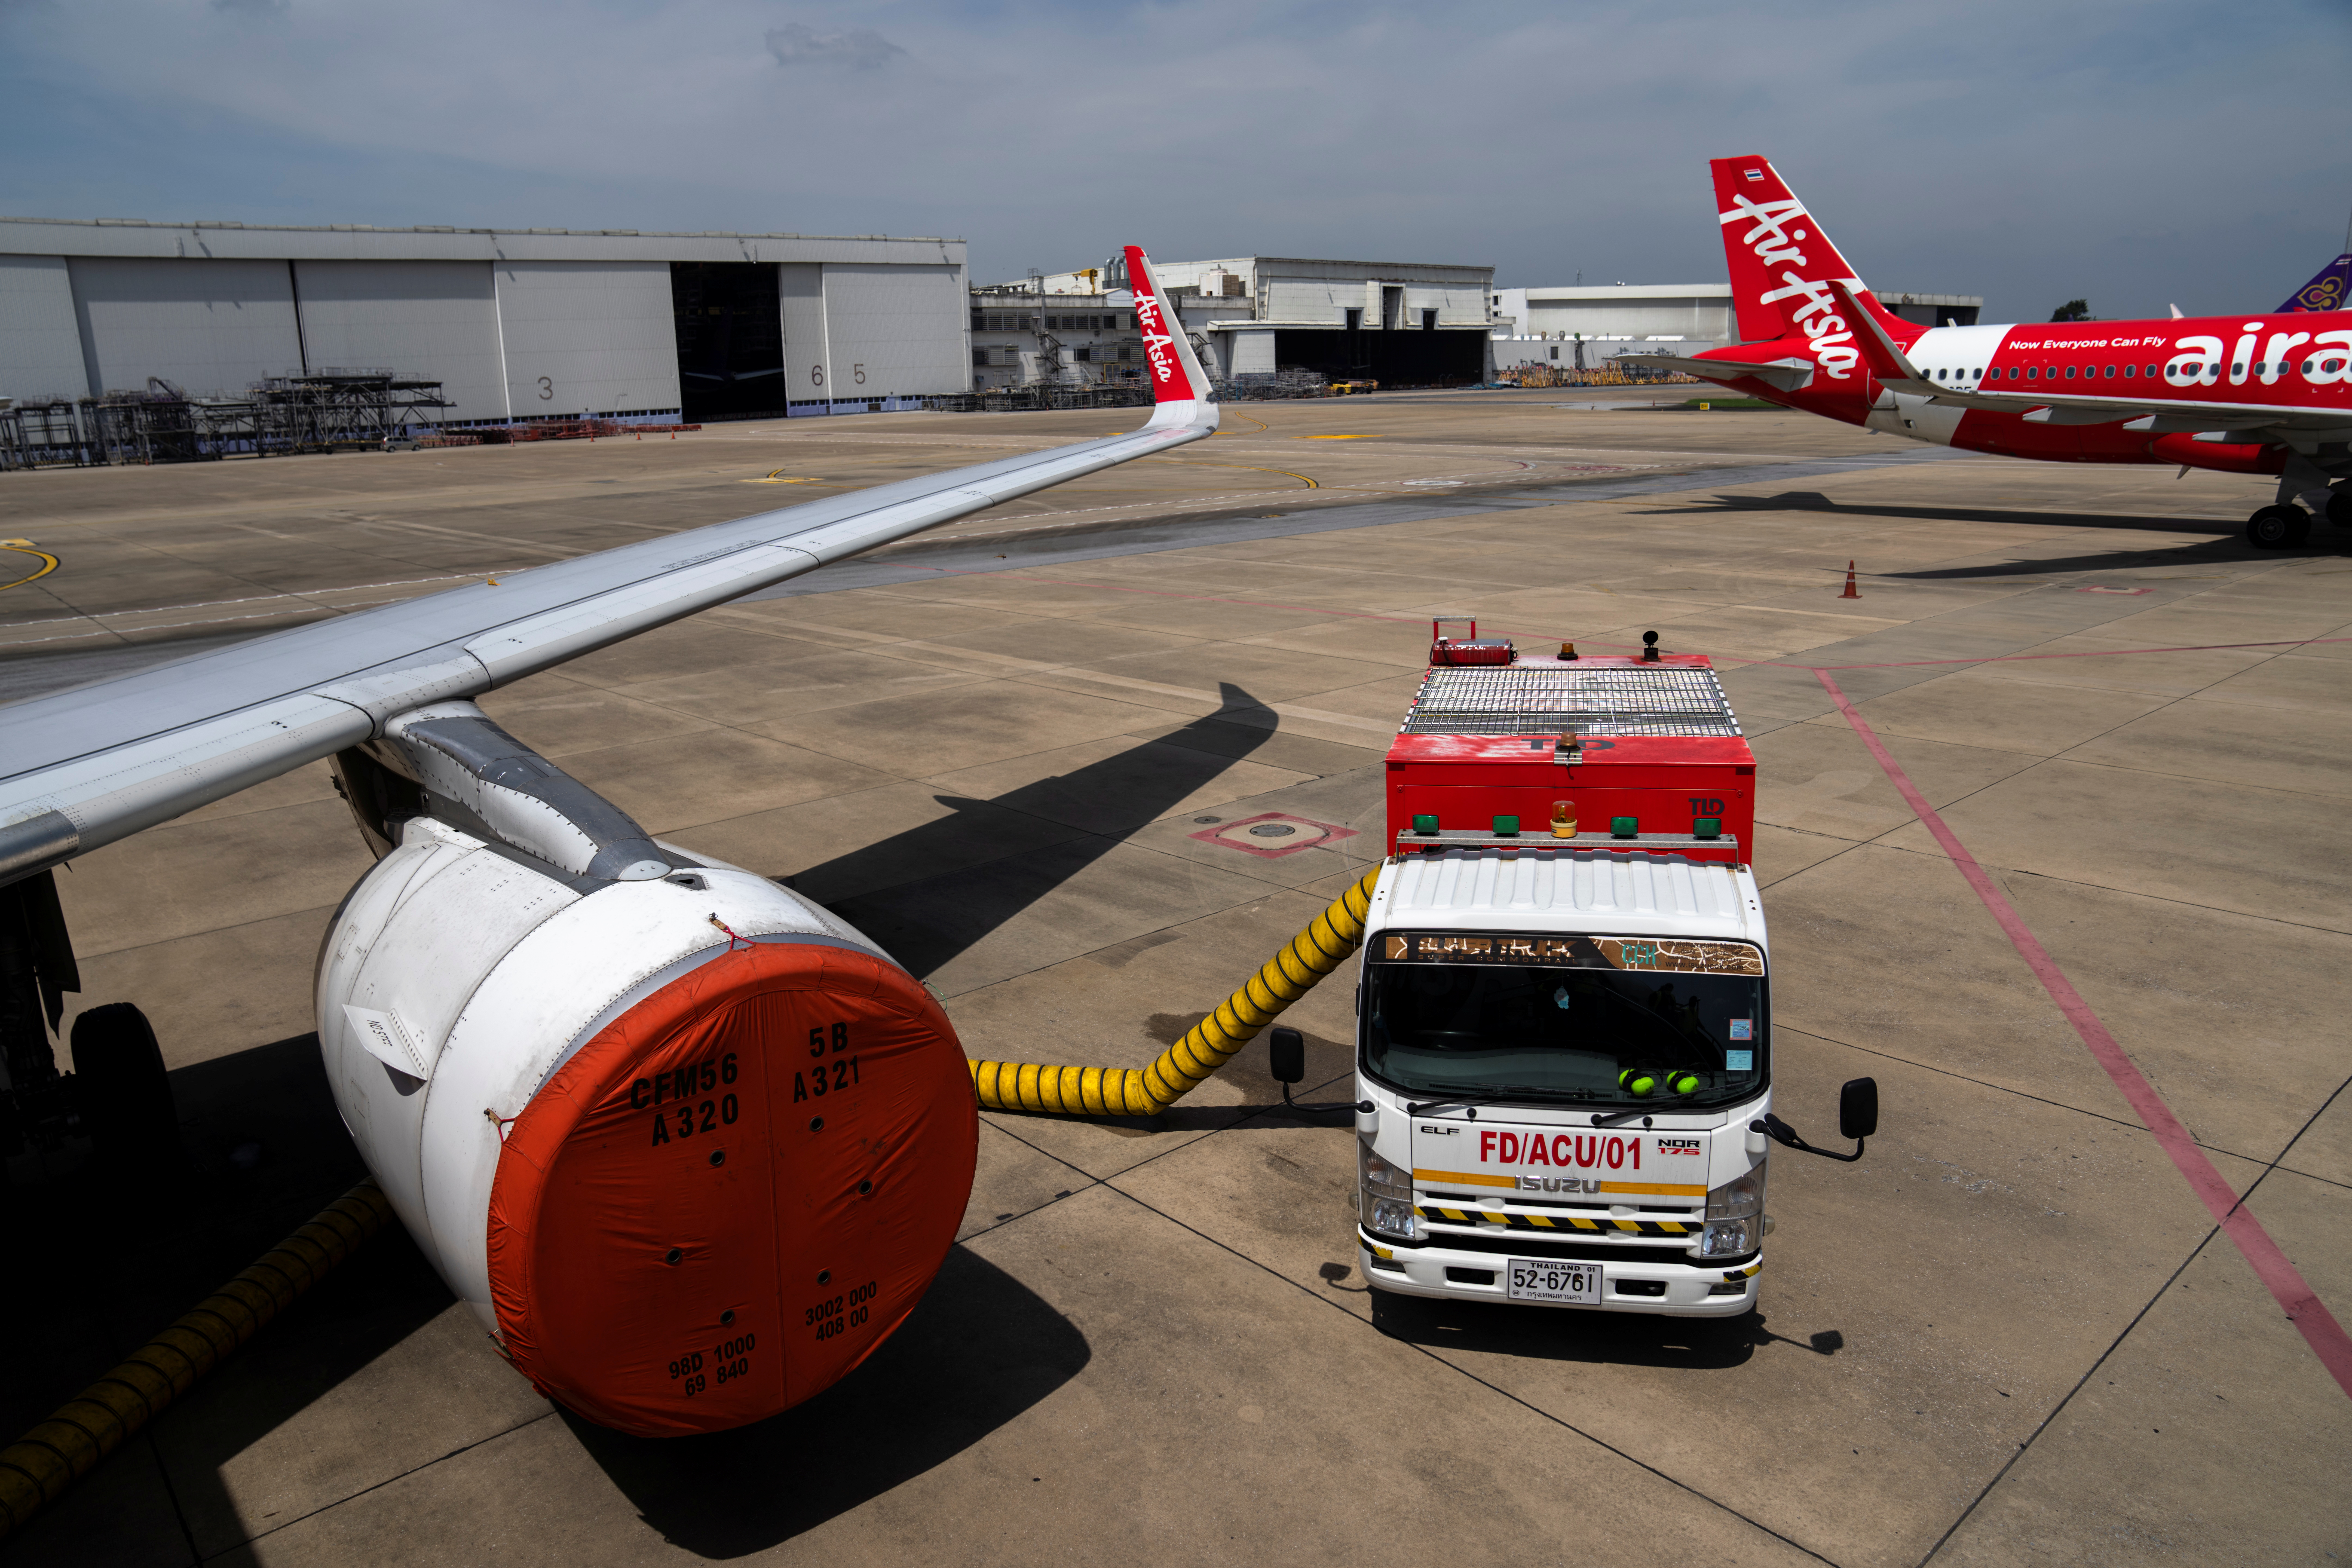 A Thai AirAsia aircraft engine is seen covered, after not being used during the coronavirus disease (COVID-19) pandemic, on the tarmac of Bangkok's Don Muang International Airport, Thailand, October 27, 2021. REUTERS/Athit Perawongmetha